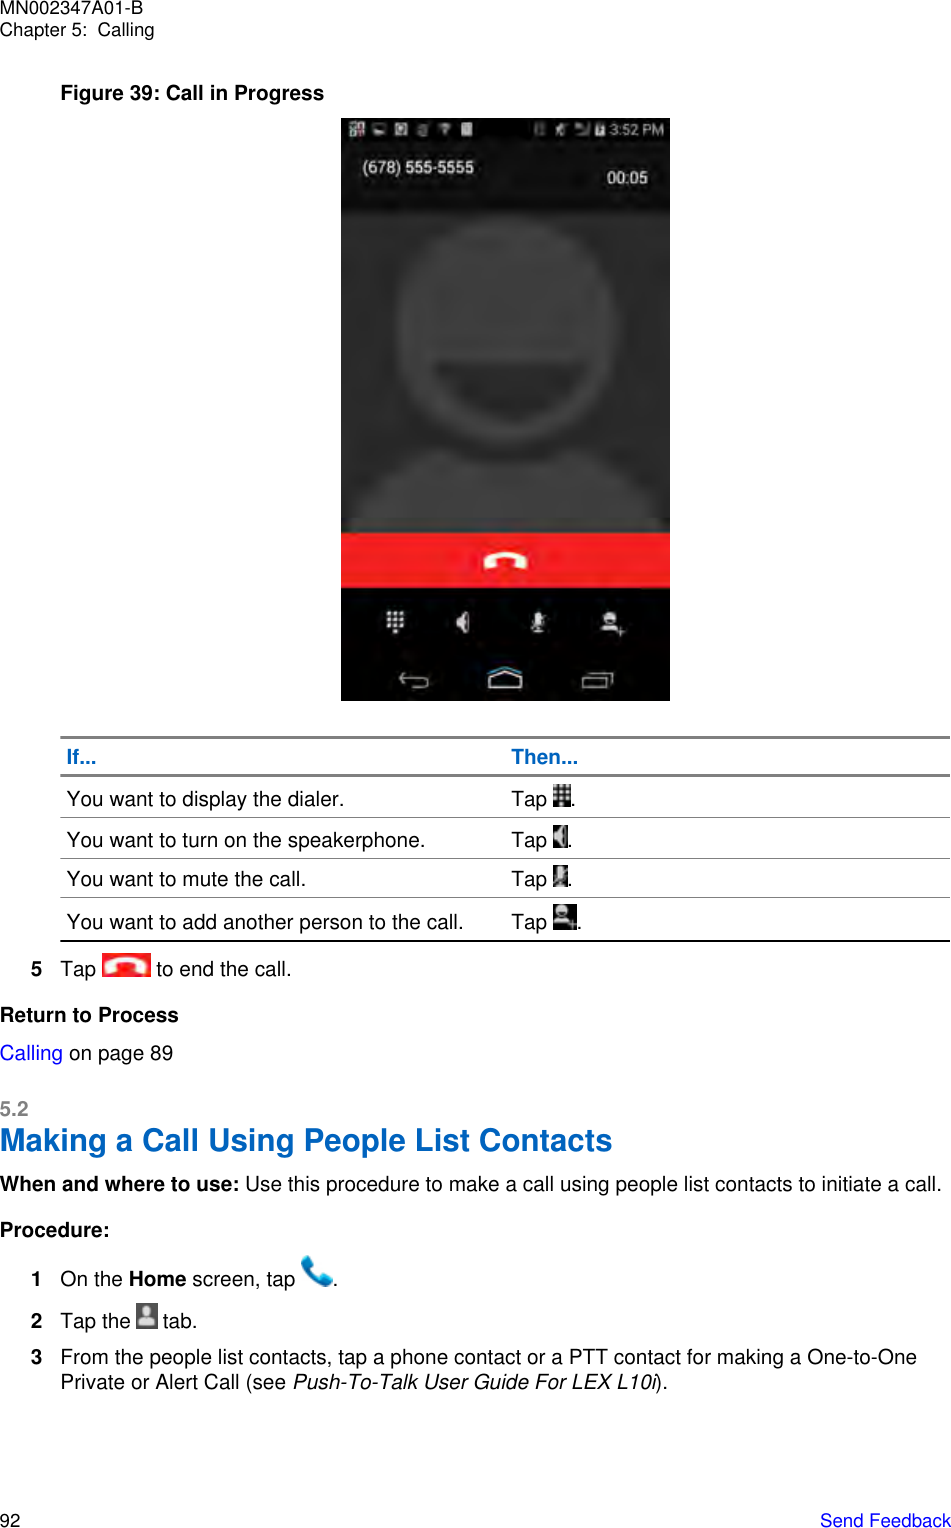 Figure 39: Call in ProgressIf... Then...You want to display the dialer. Tap  .You want to turn on the speakerphone. Tap  .You want to mute the call. Tap  .You want to add another person to the call. Tap  .5Tap   to end the call.Return to ProcessCalling on page 895.2Making a Call Using People List ContactsWhen and where to use: Use this procedure to make a call using people list contacts to initiate a call.Procedure:1On the Home screen, tap  .2Tap the   tab.3From the people list contacts, tap a phone contact or a PTT contact for making a One-to-OnePrivate or Alert Call (see Push-To-Talk User Guide For LEX L10i).MN002347A01-BChapter 5:  Calling92   Send Feedback